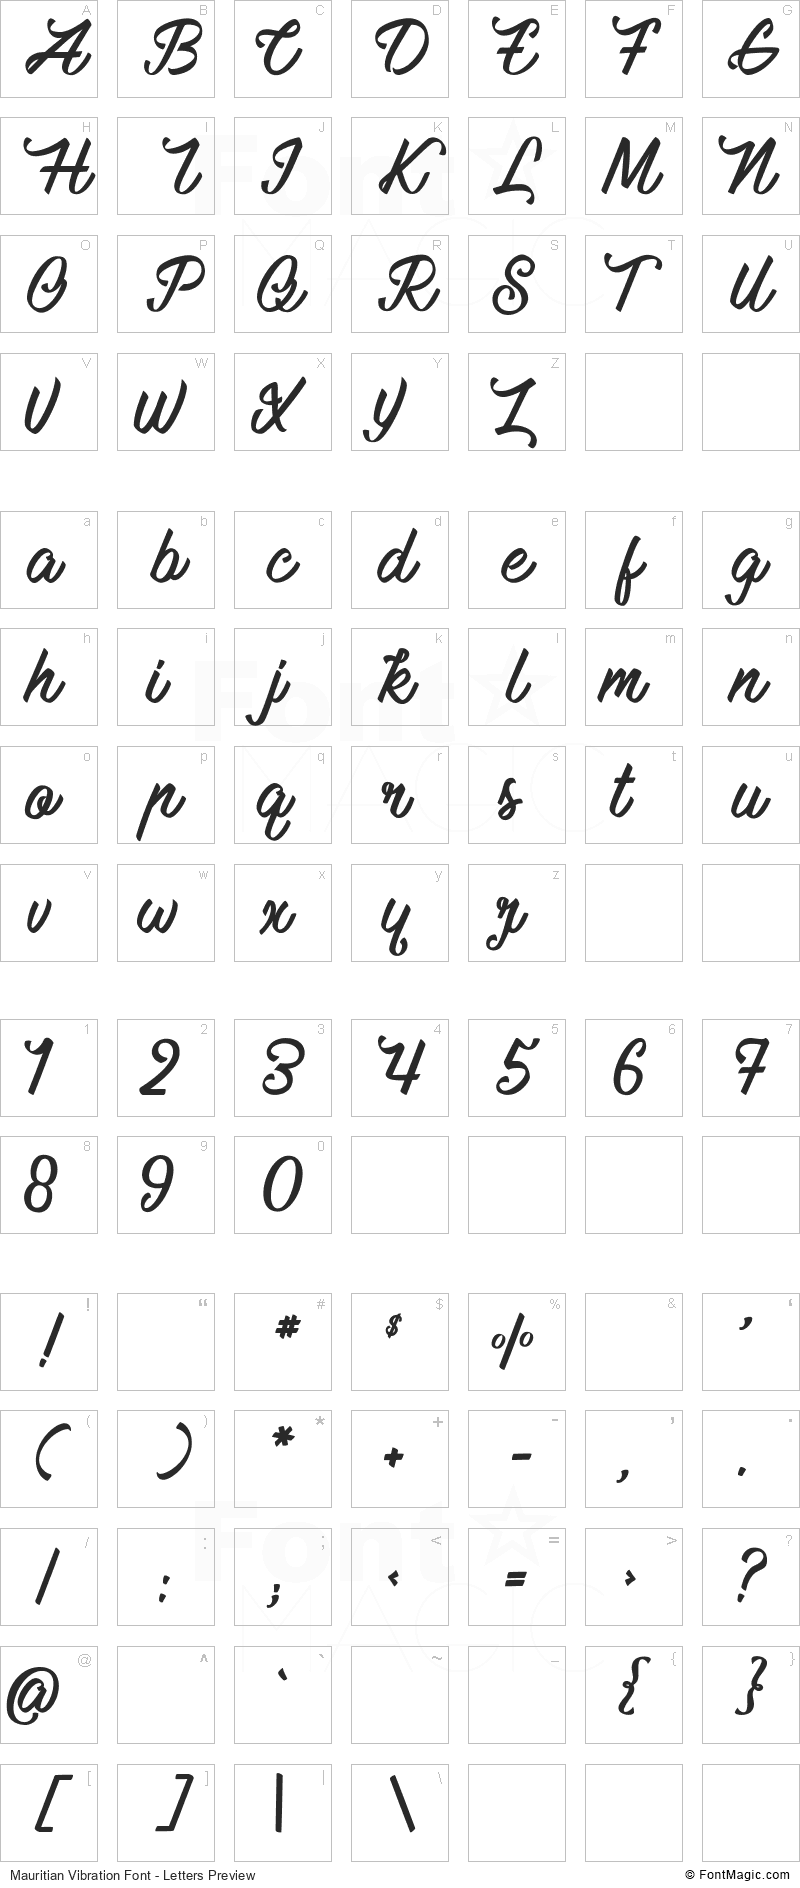 Mauritian Vibration Font - All Latters Preview Chart